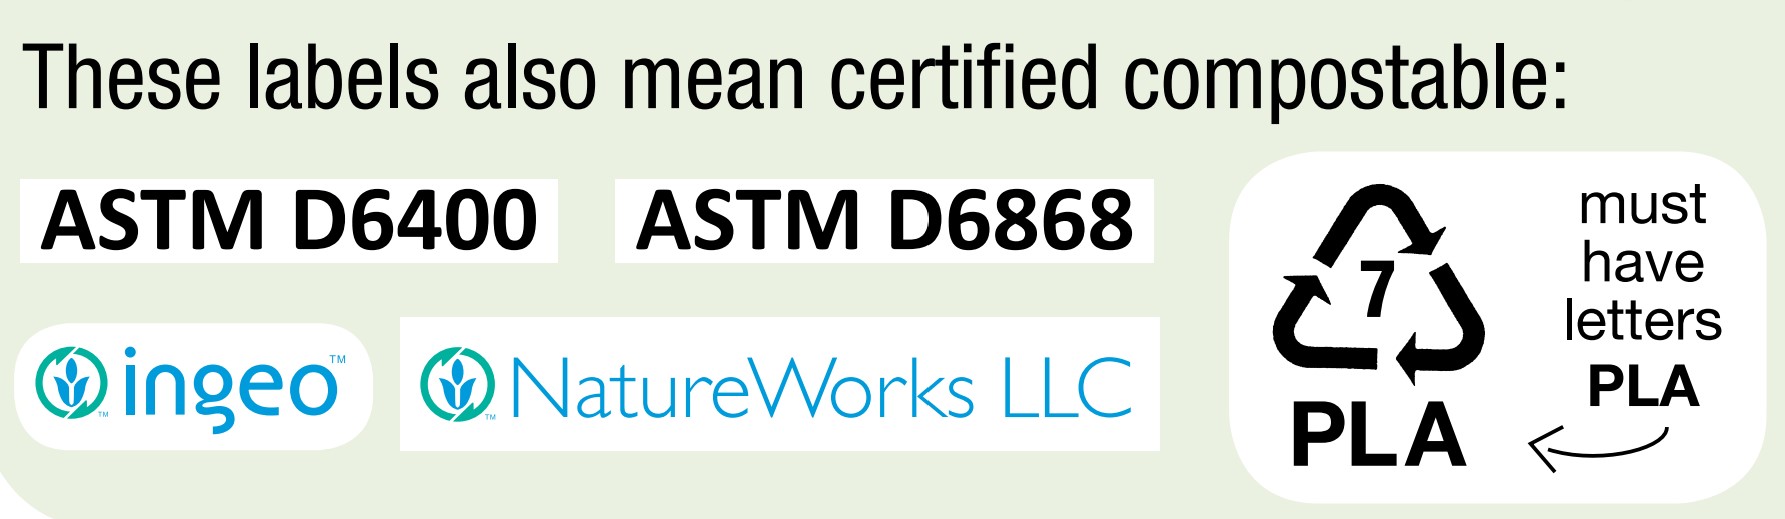 These labels also mean certified compostable: ASTM D6400, ASTM D6868, ingeo, NatureWorks LLC and PLA 7